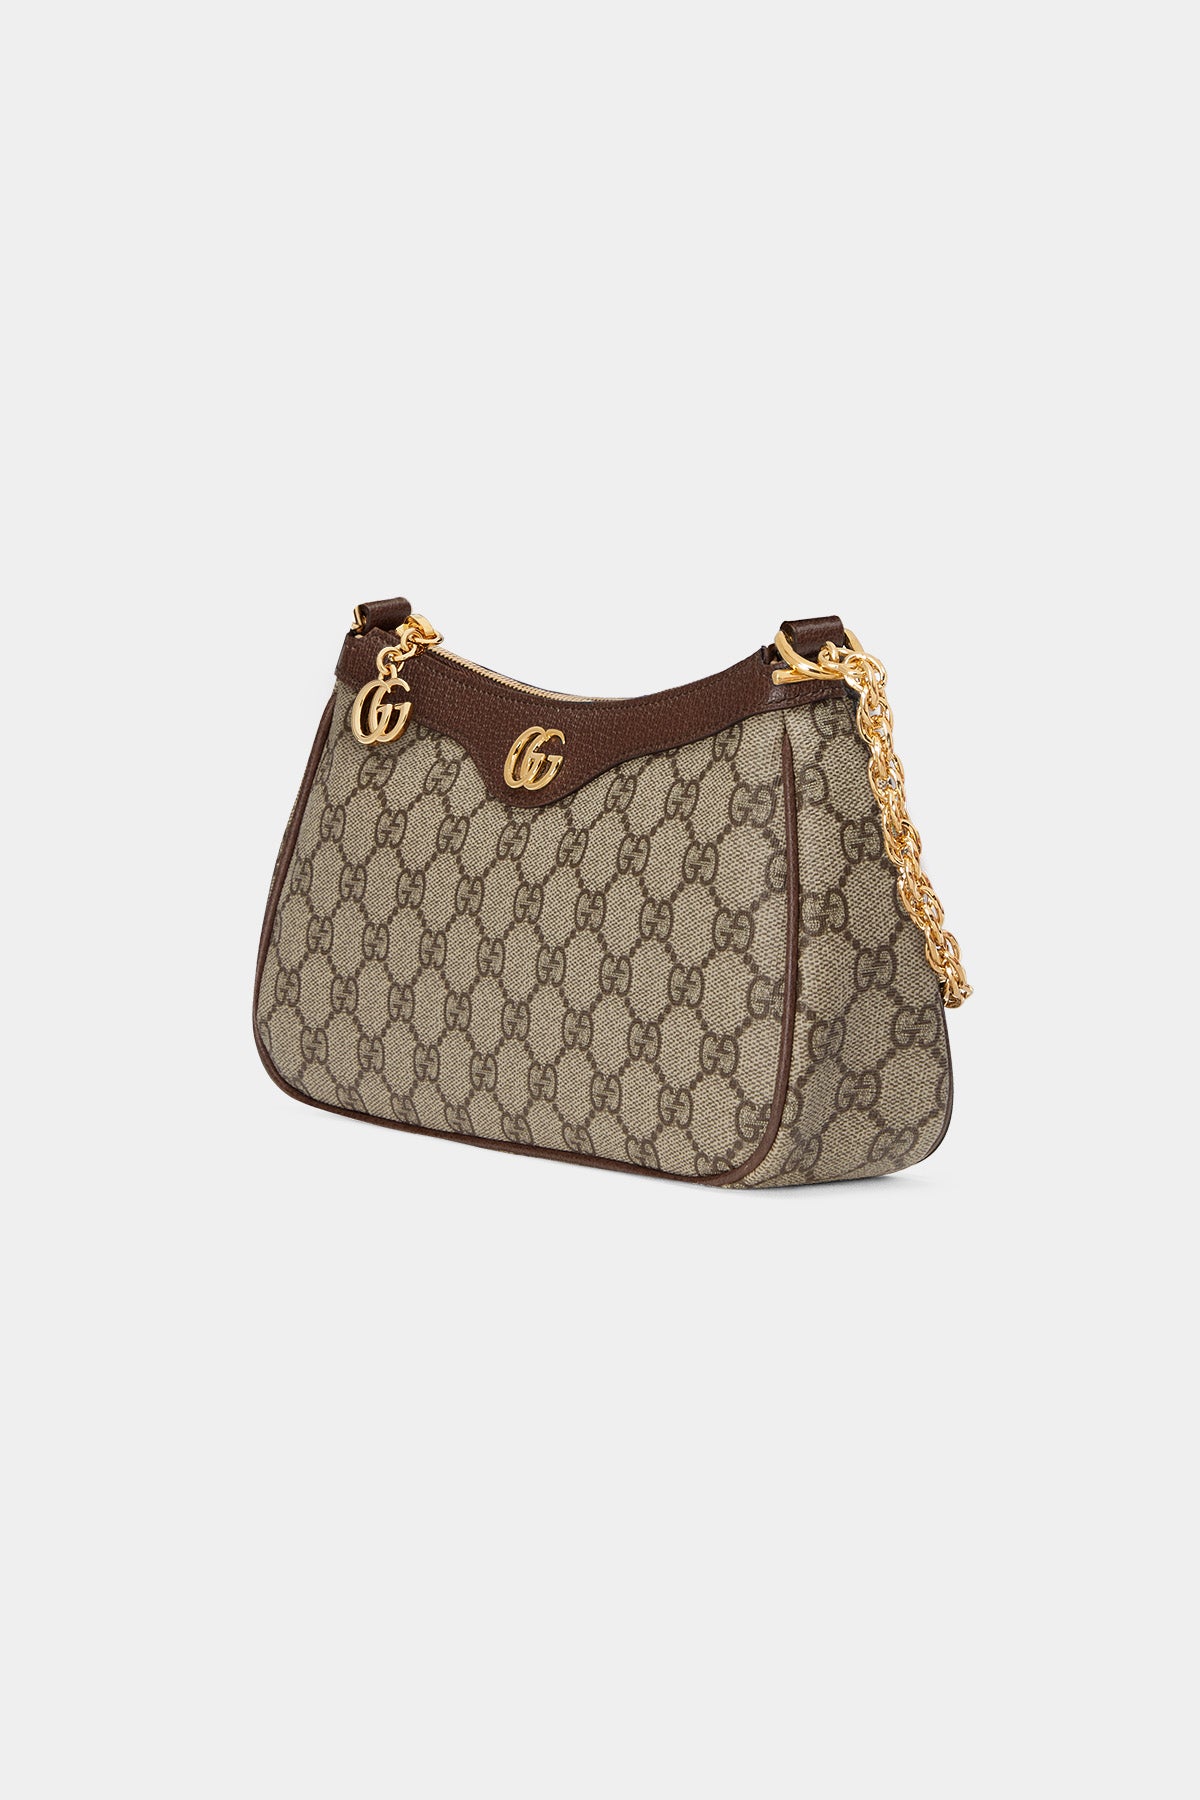 Gucci Purse Second Hand | Buy or Sell your Vintage & small bags for women -  Vestiaire Collective